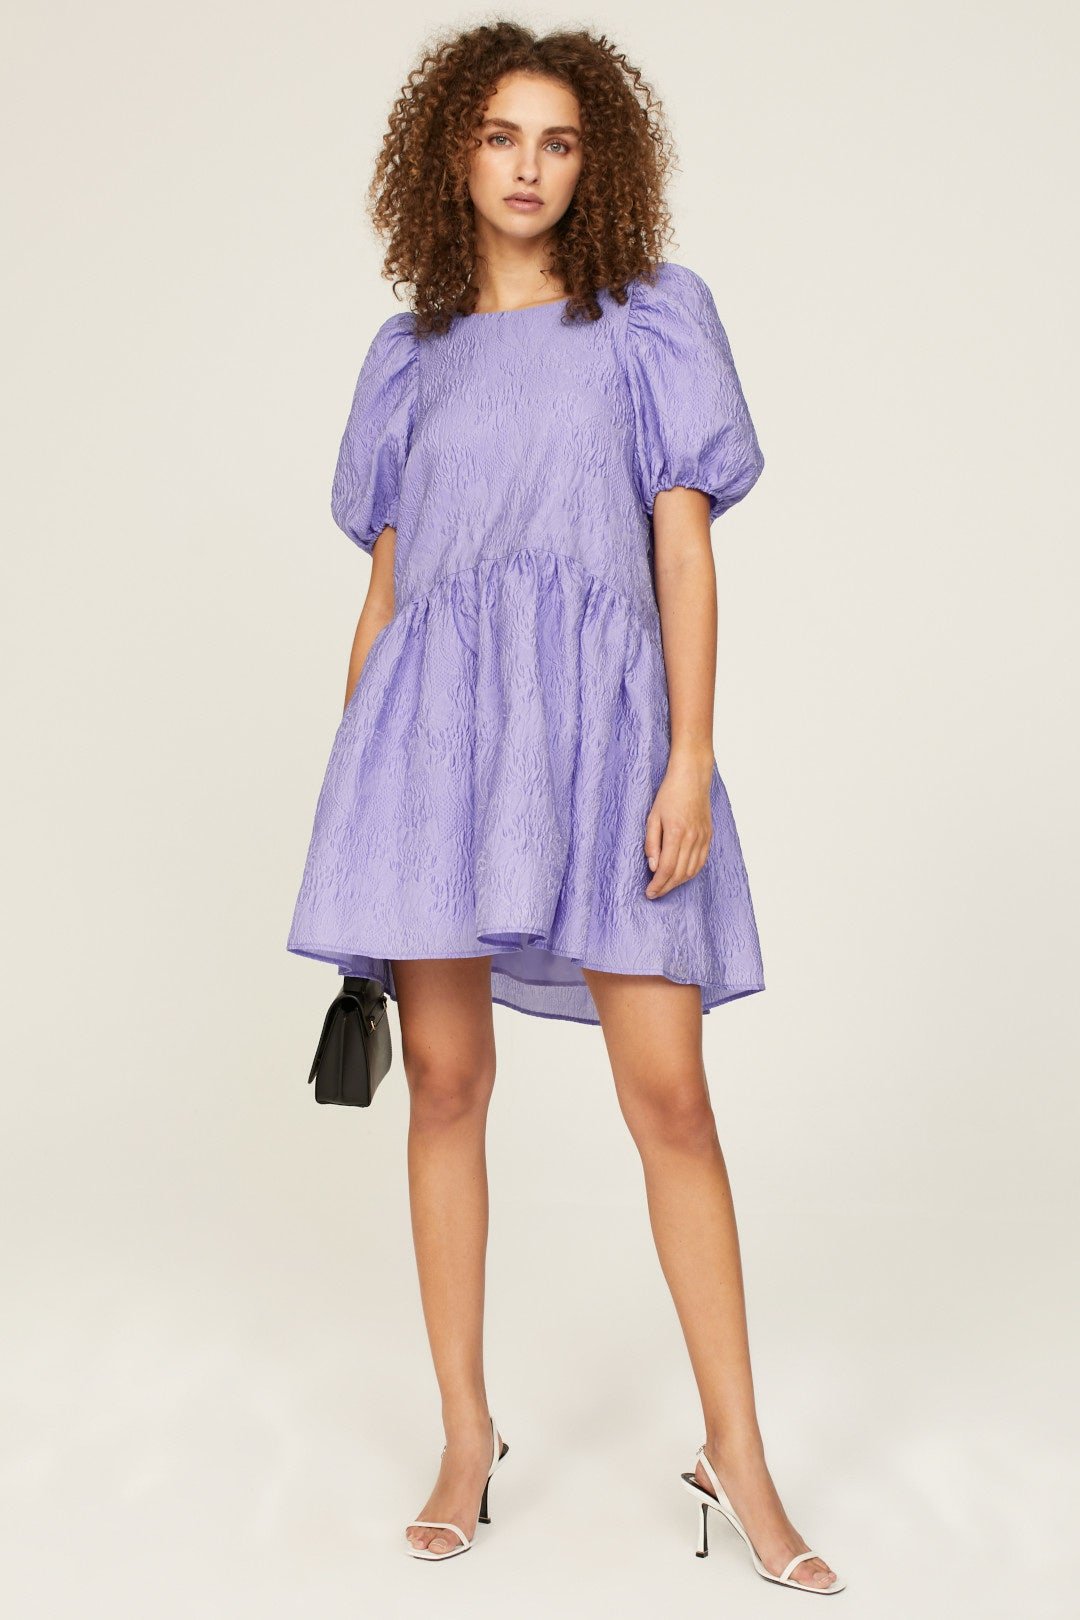 short purple dress with bows peter som